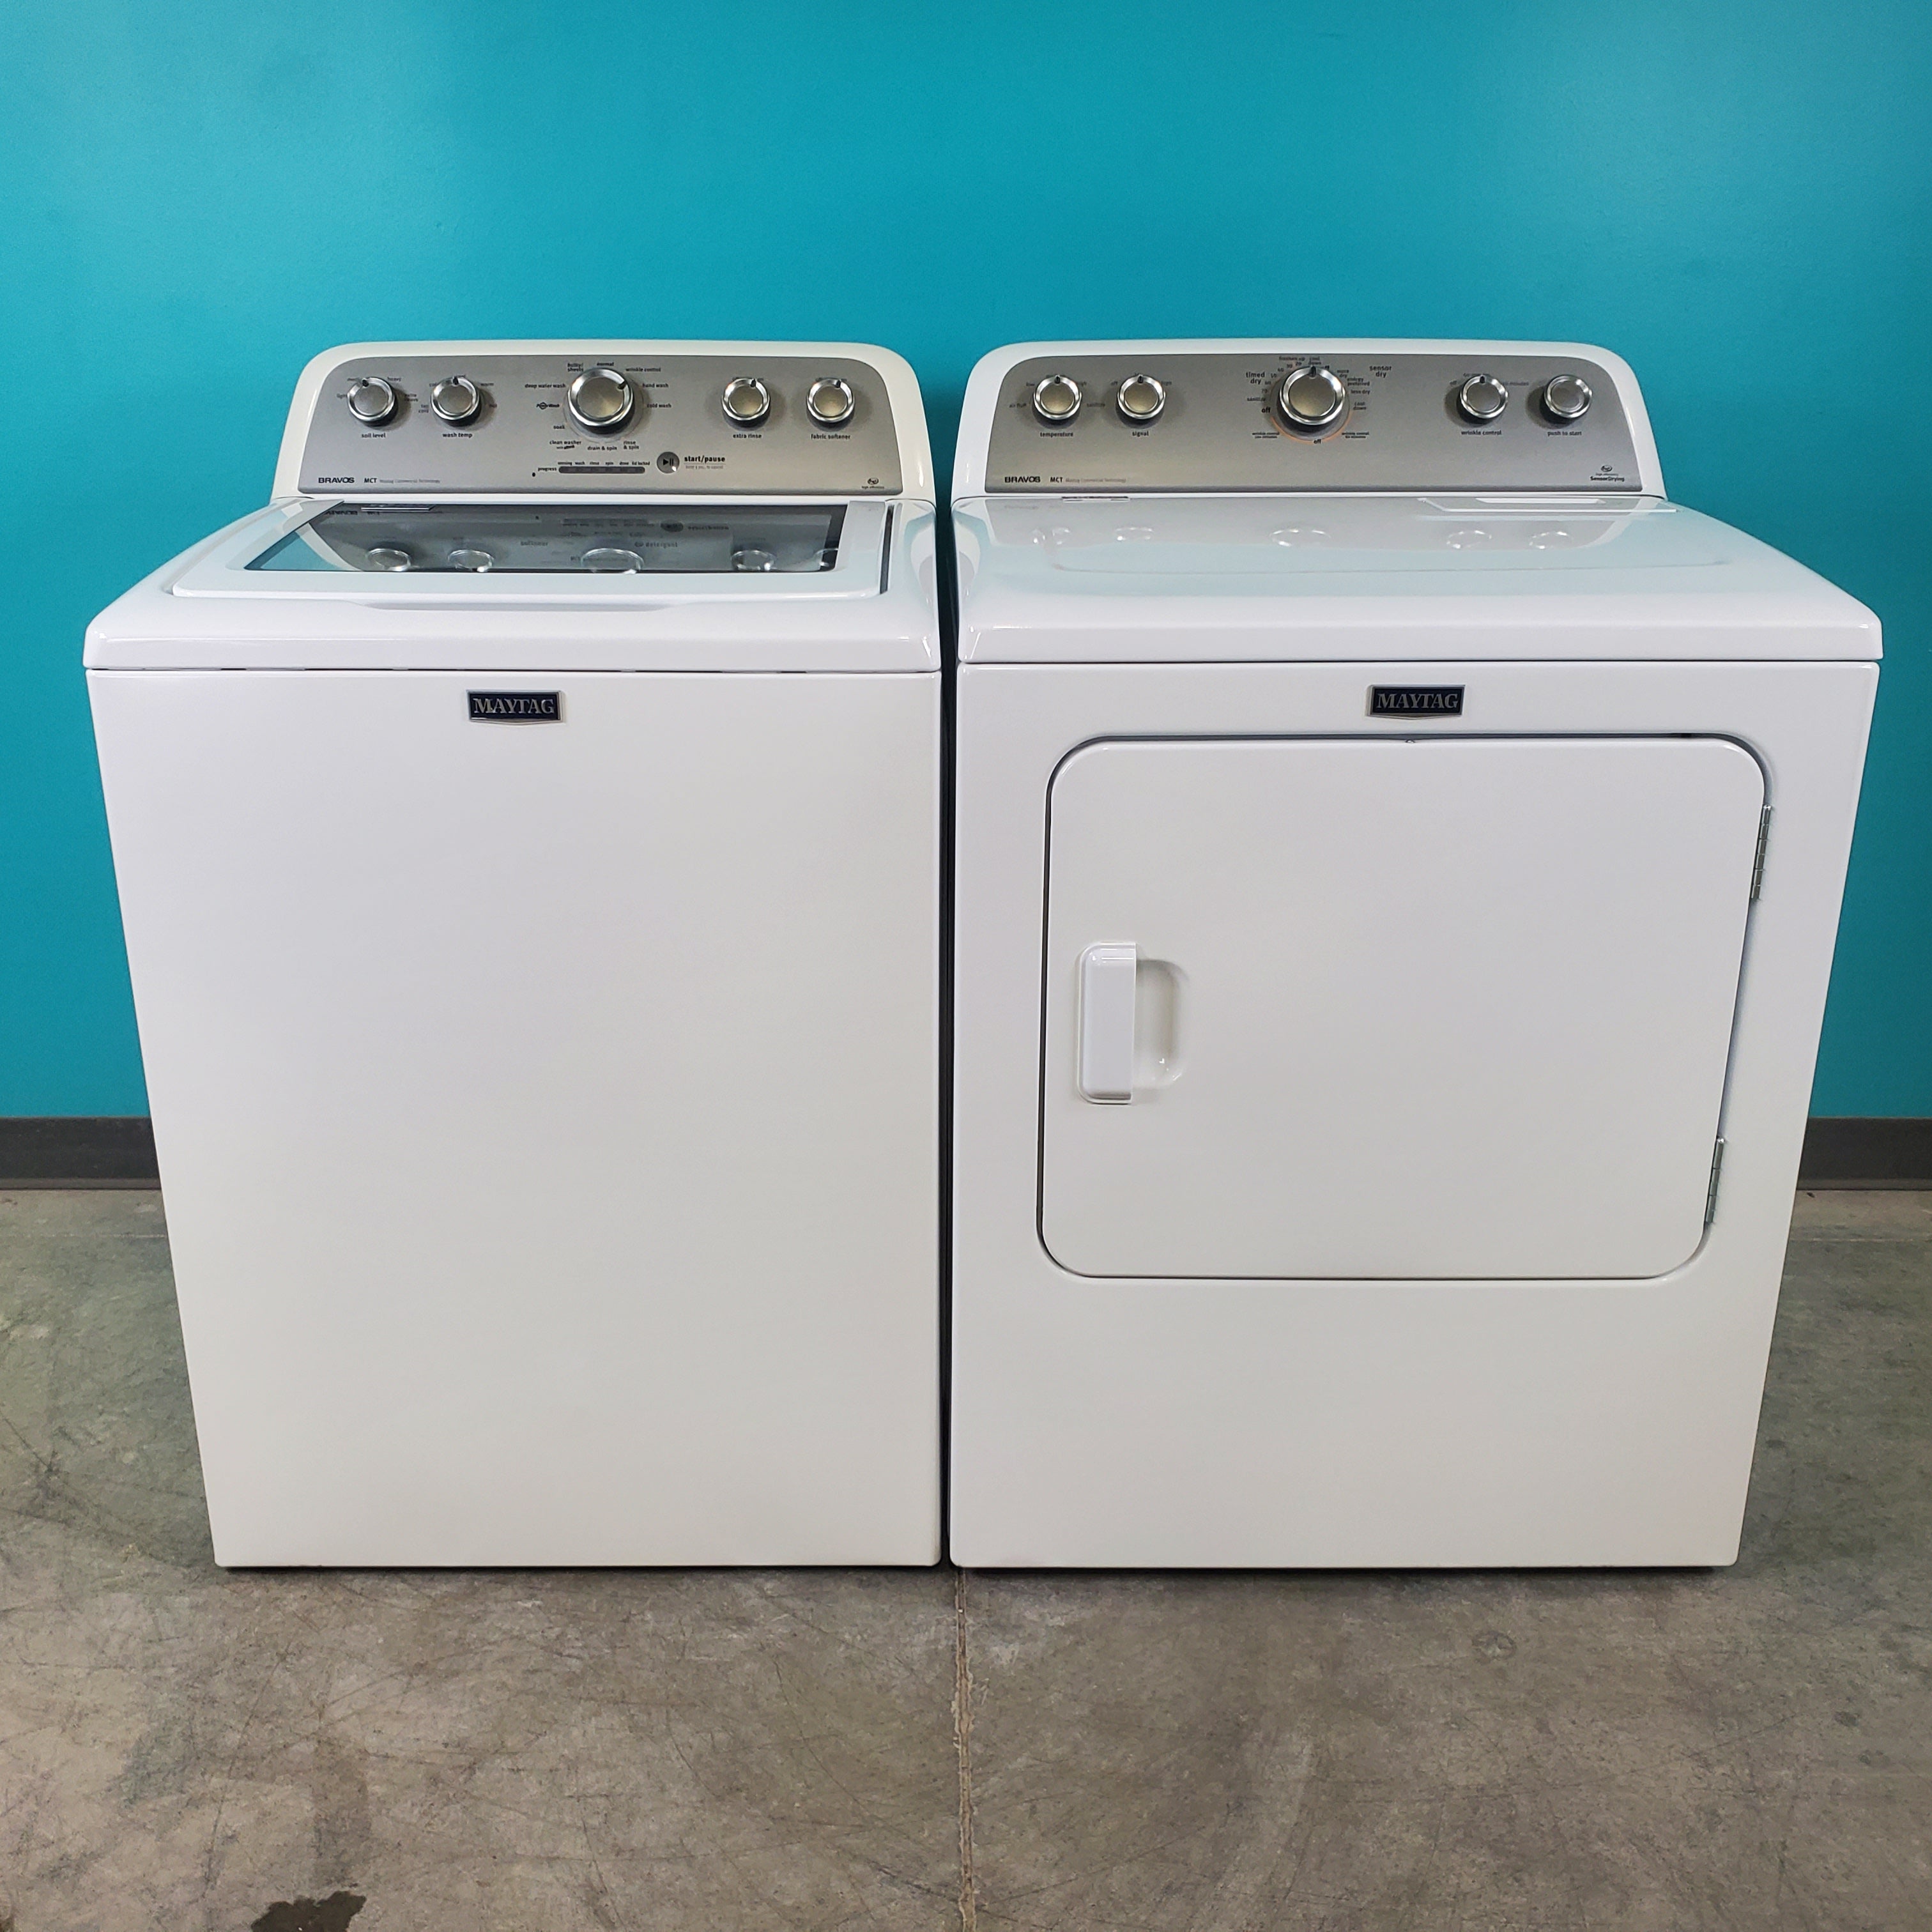 Pictures of Neu Elite Maytag Bravos High Capacity Impeller Washer & Electric Dryer Set: 4.3 cu. ft. High Capacity Impeller Washer With Extra Water Cycle / Option & 7.0 cu. ft. Electric 220v Dryer With Auto Sensor Dry  - Certified Refurbished - Neu Appliance Outlet - Discount Appliance Outlet in Austin, Tx